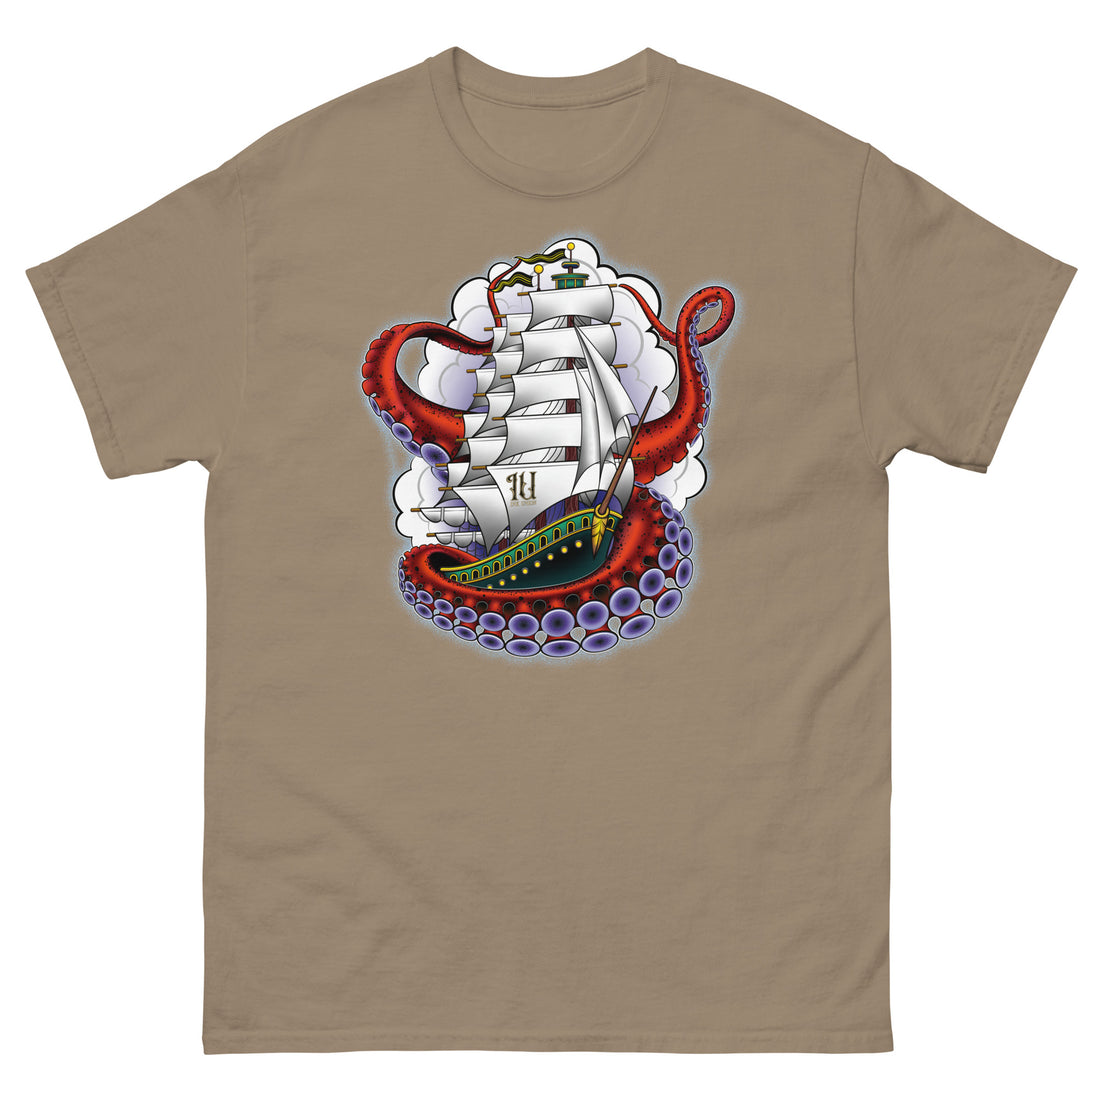 A medium brown t-shirt with an old-school clipper ship tattoo design in green and brown with white sails surrounded by octopus tentacles in shades of red with purple tentacles. Behind the ship are purple-tinged clouds.